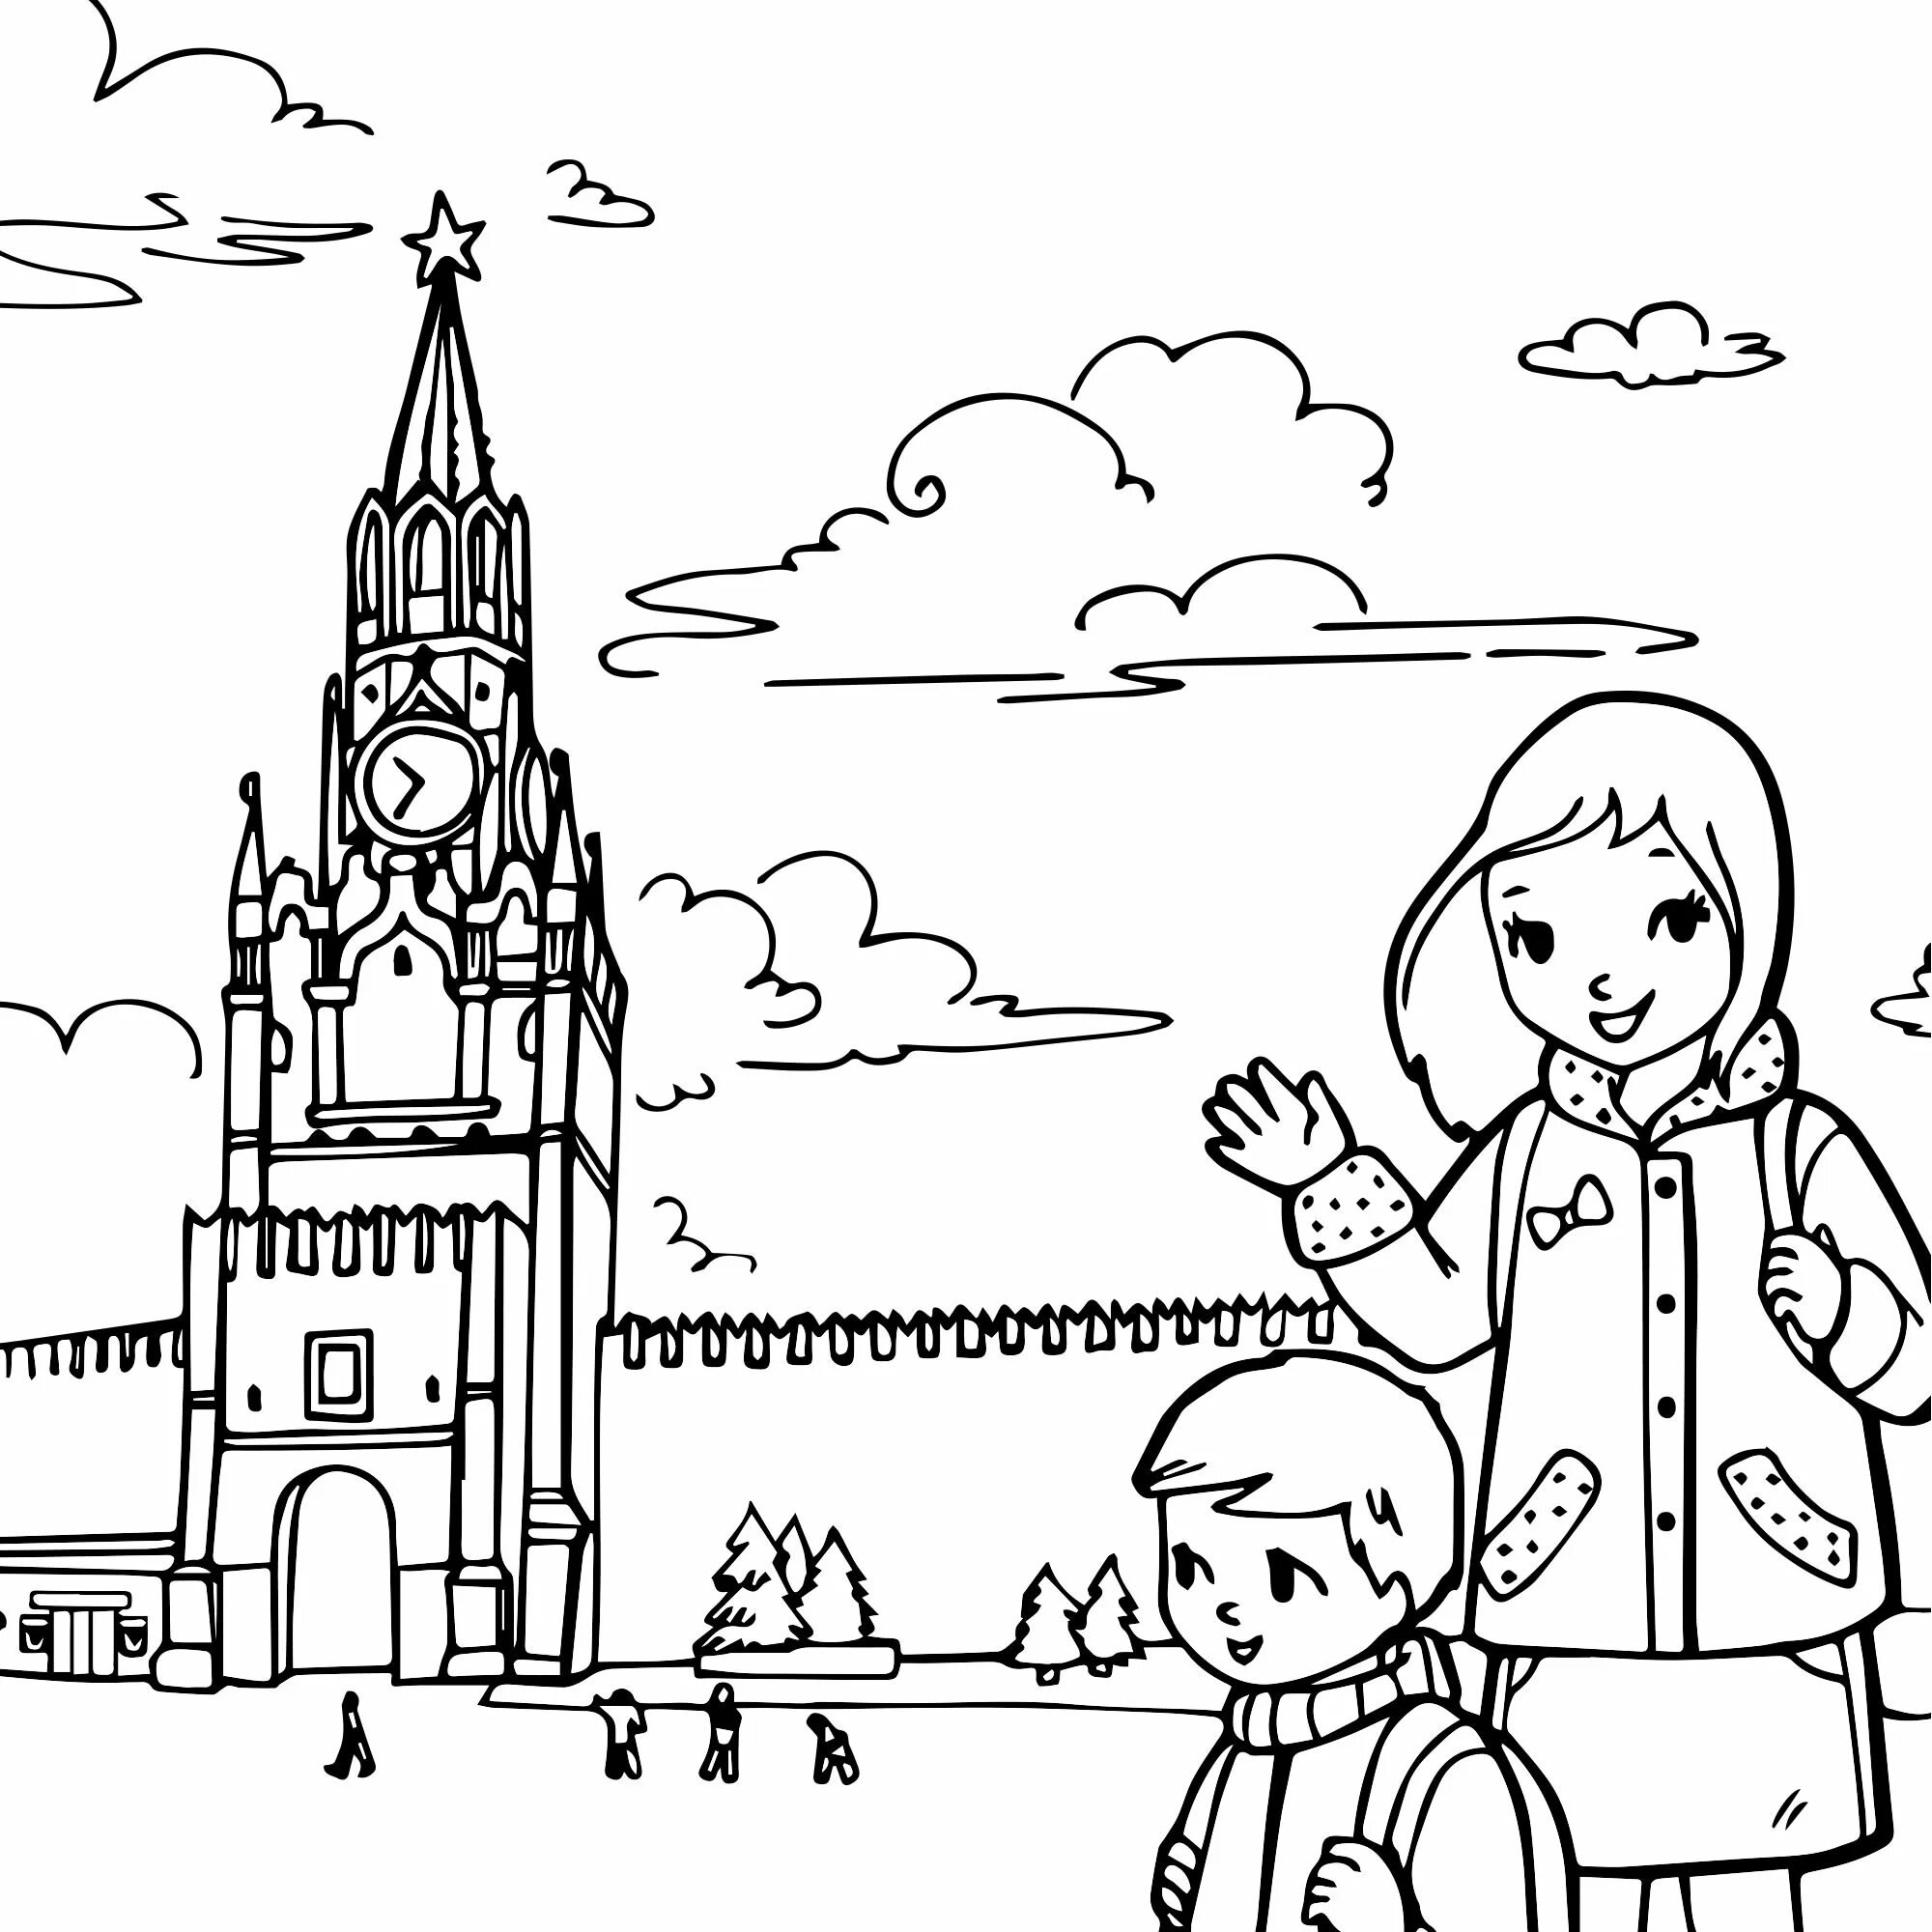 Charming russia and motherland coloring book for kids